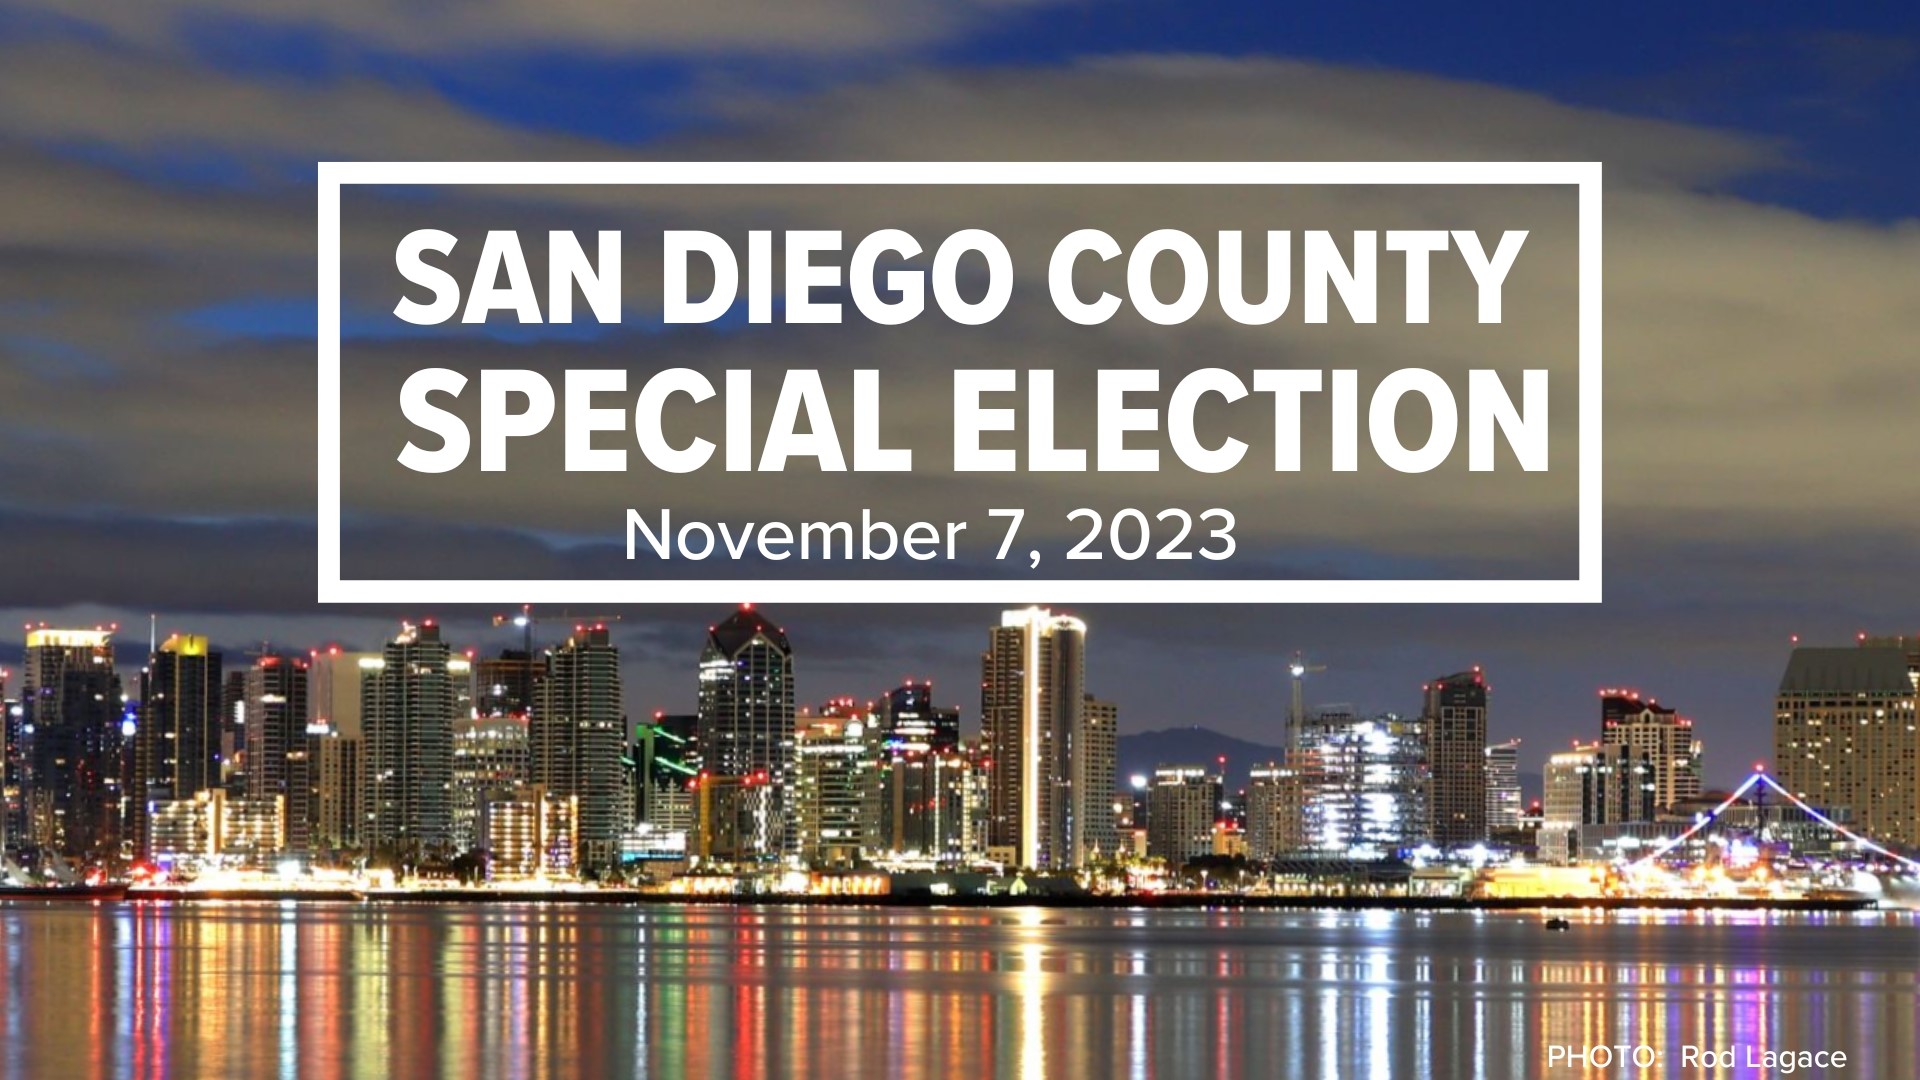 Results are coming in for the November 7 Special Election in San Diego.